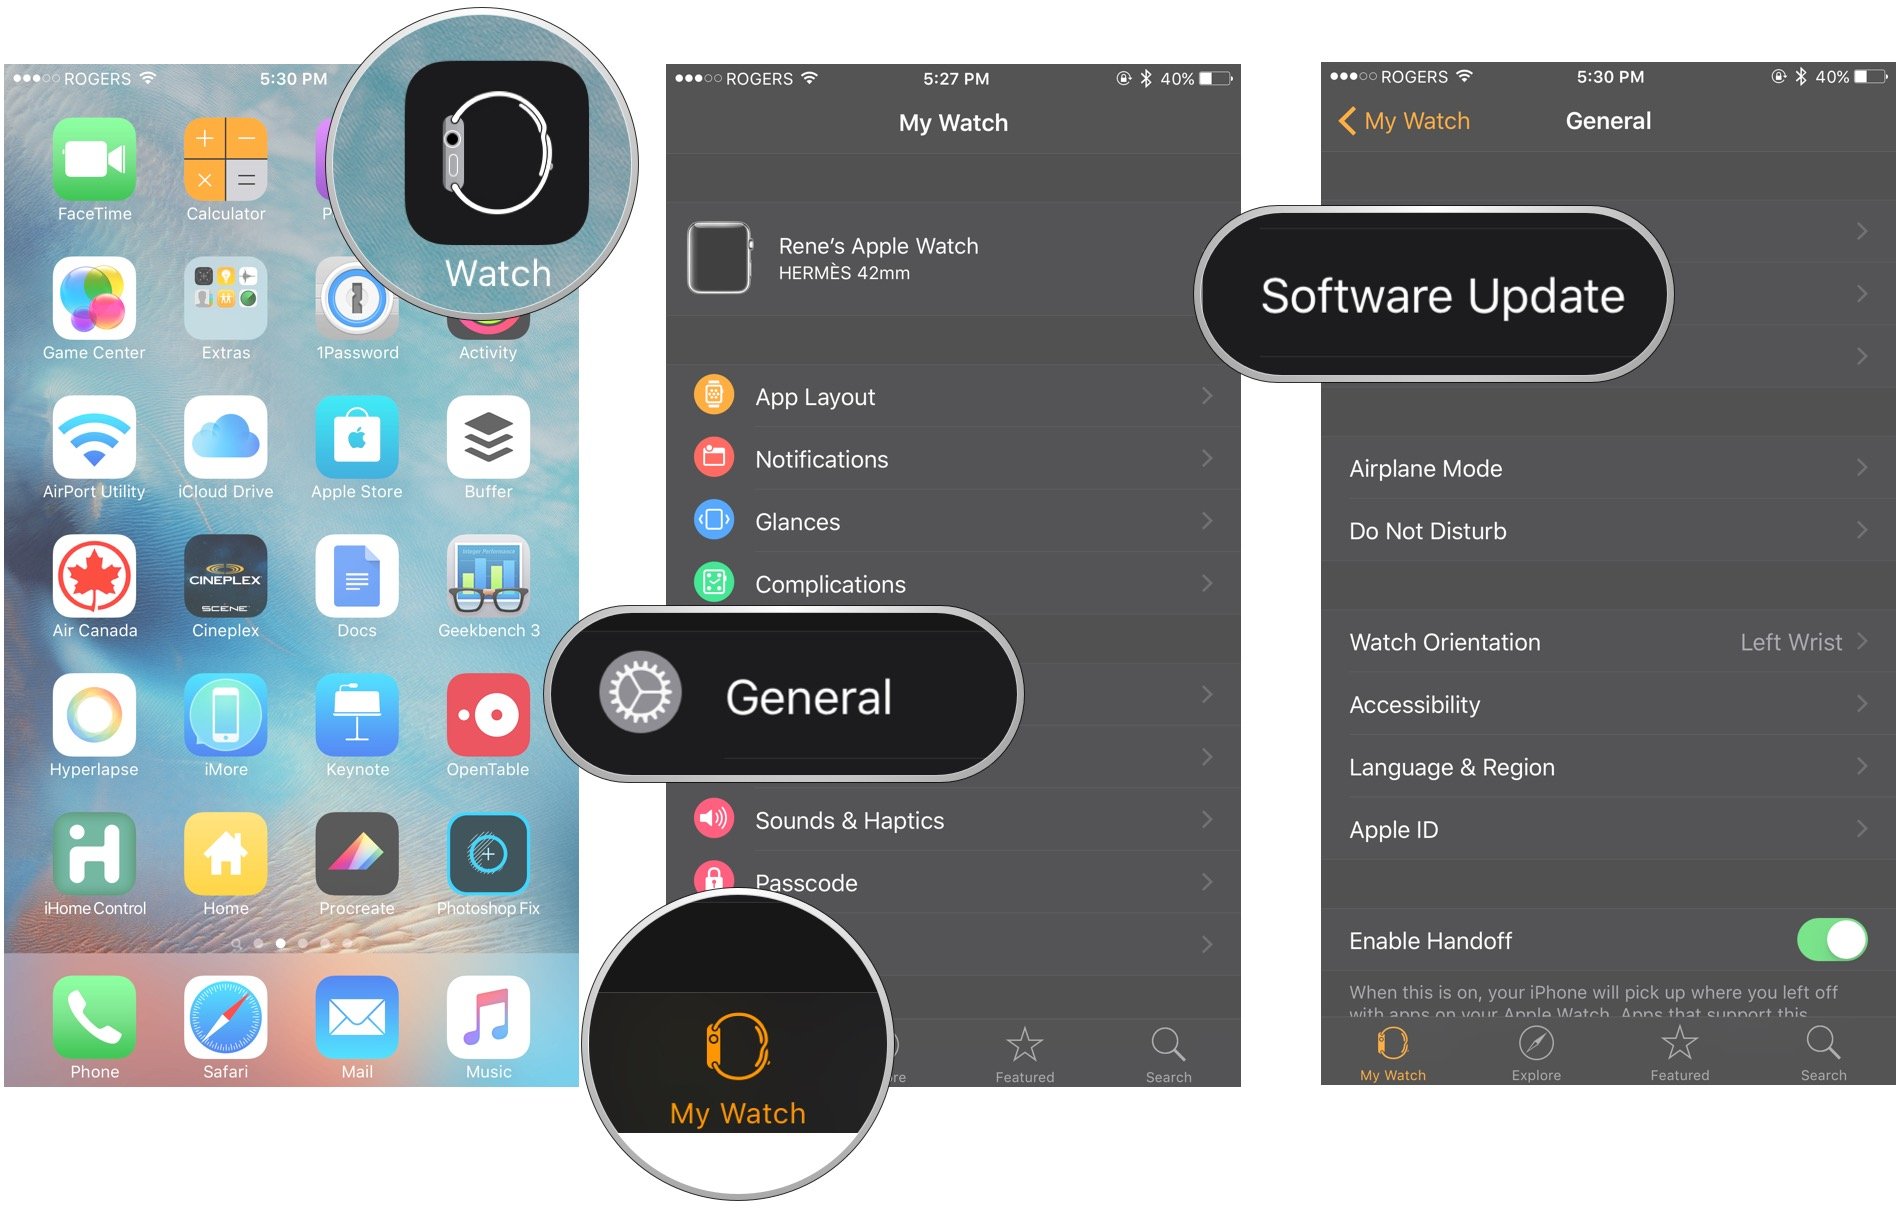 Install watchOS, which shows how to open the Watch app, tap General, tap Software Update